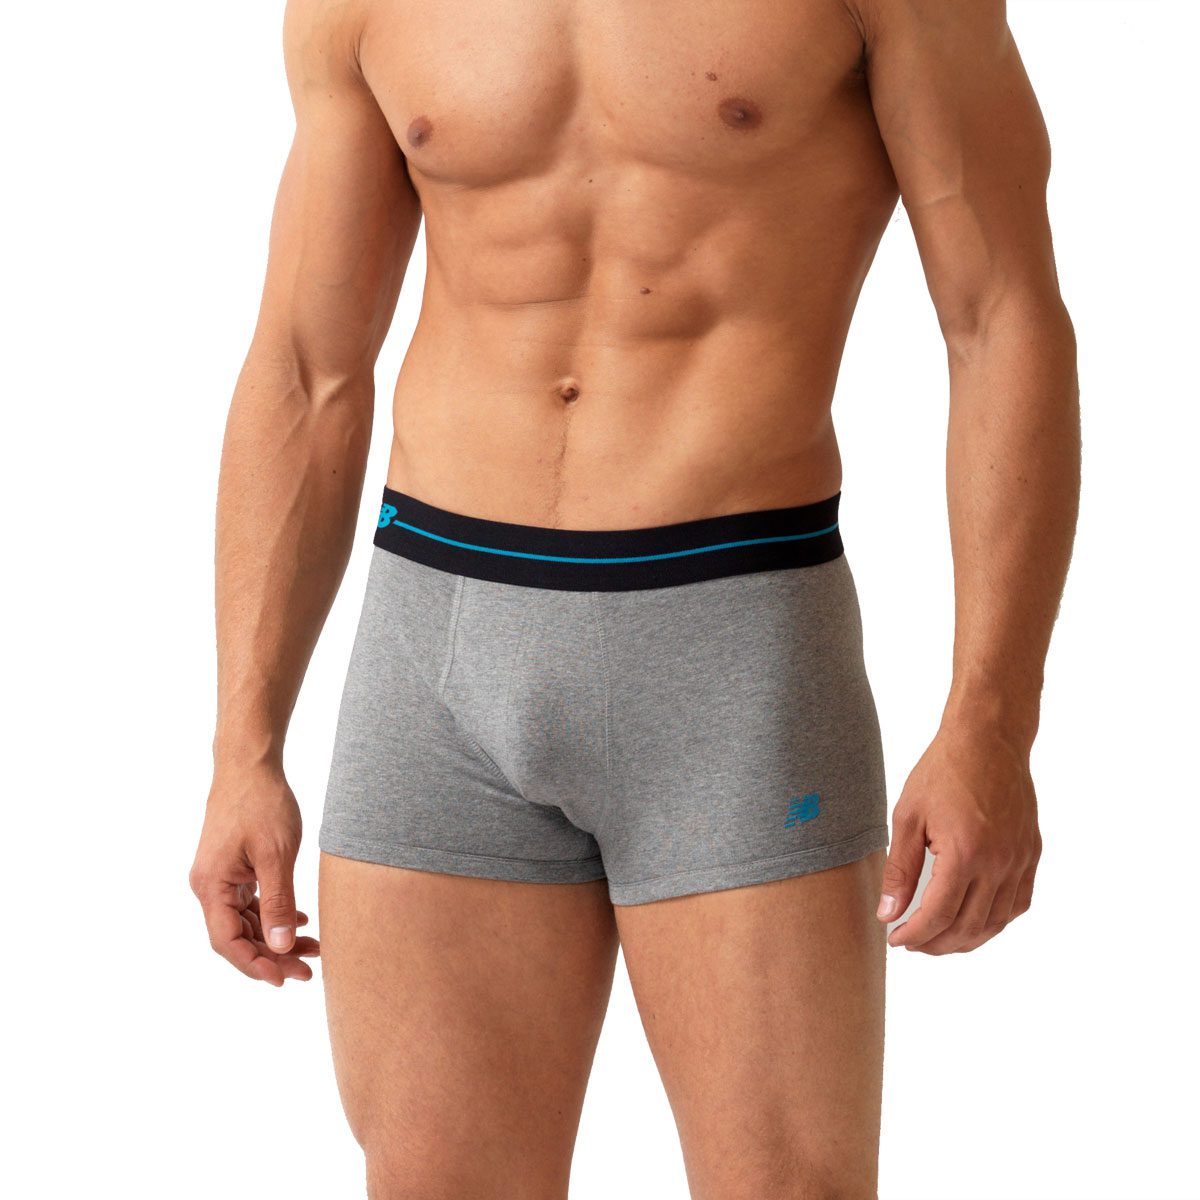 Advantages of purchasing underwear from websites